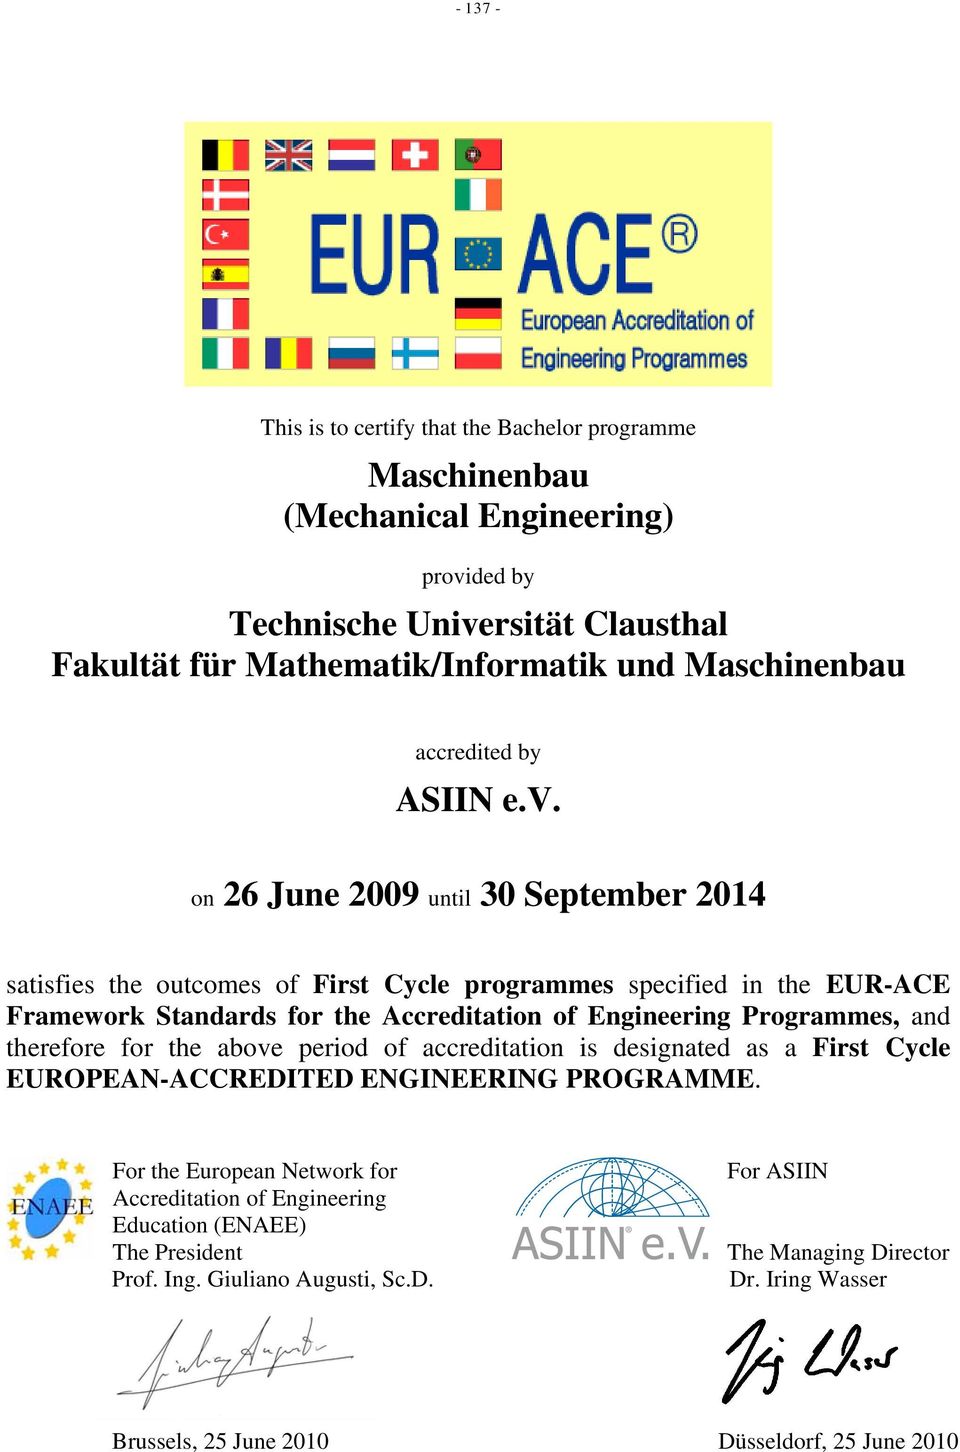 on 26 June 2009 until 30 September 2014 satisfies the outcomes of First Cycle programmes specified in the EUR-ACE Framework Standards for the Accreditation of Engineering Programmes, and